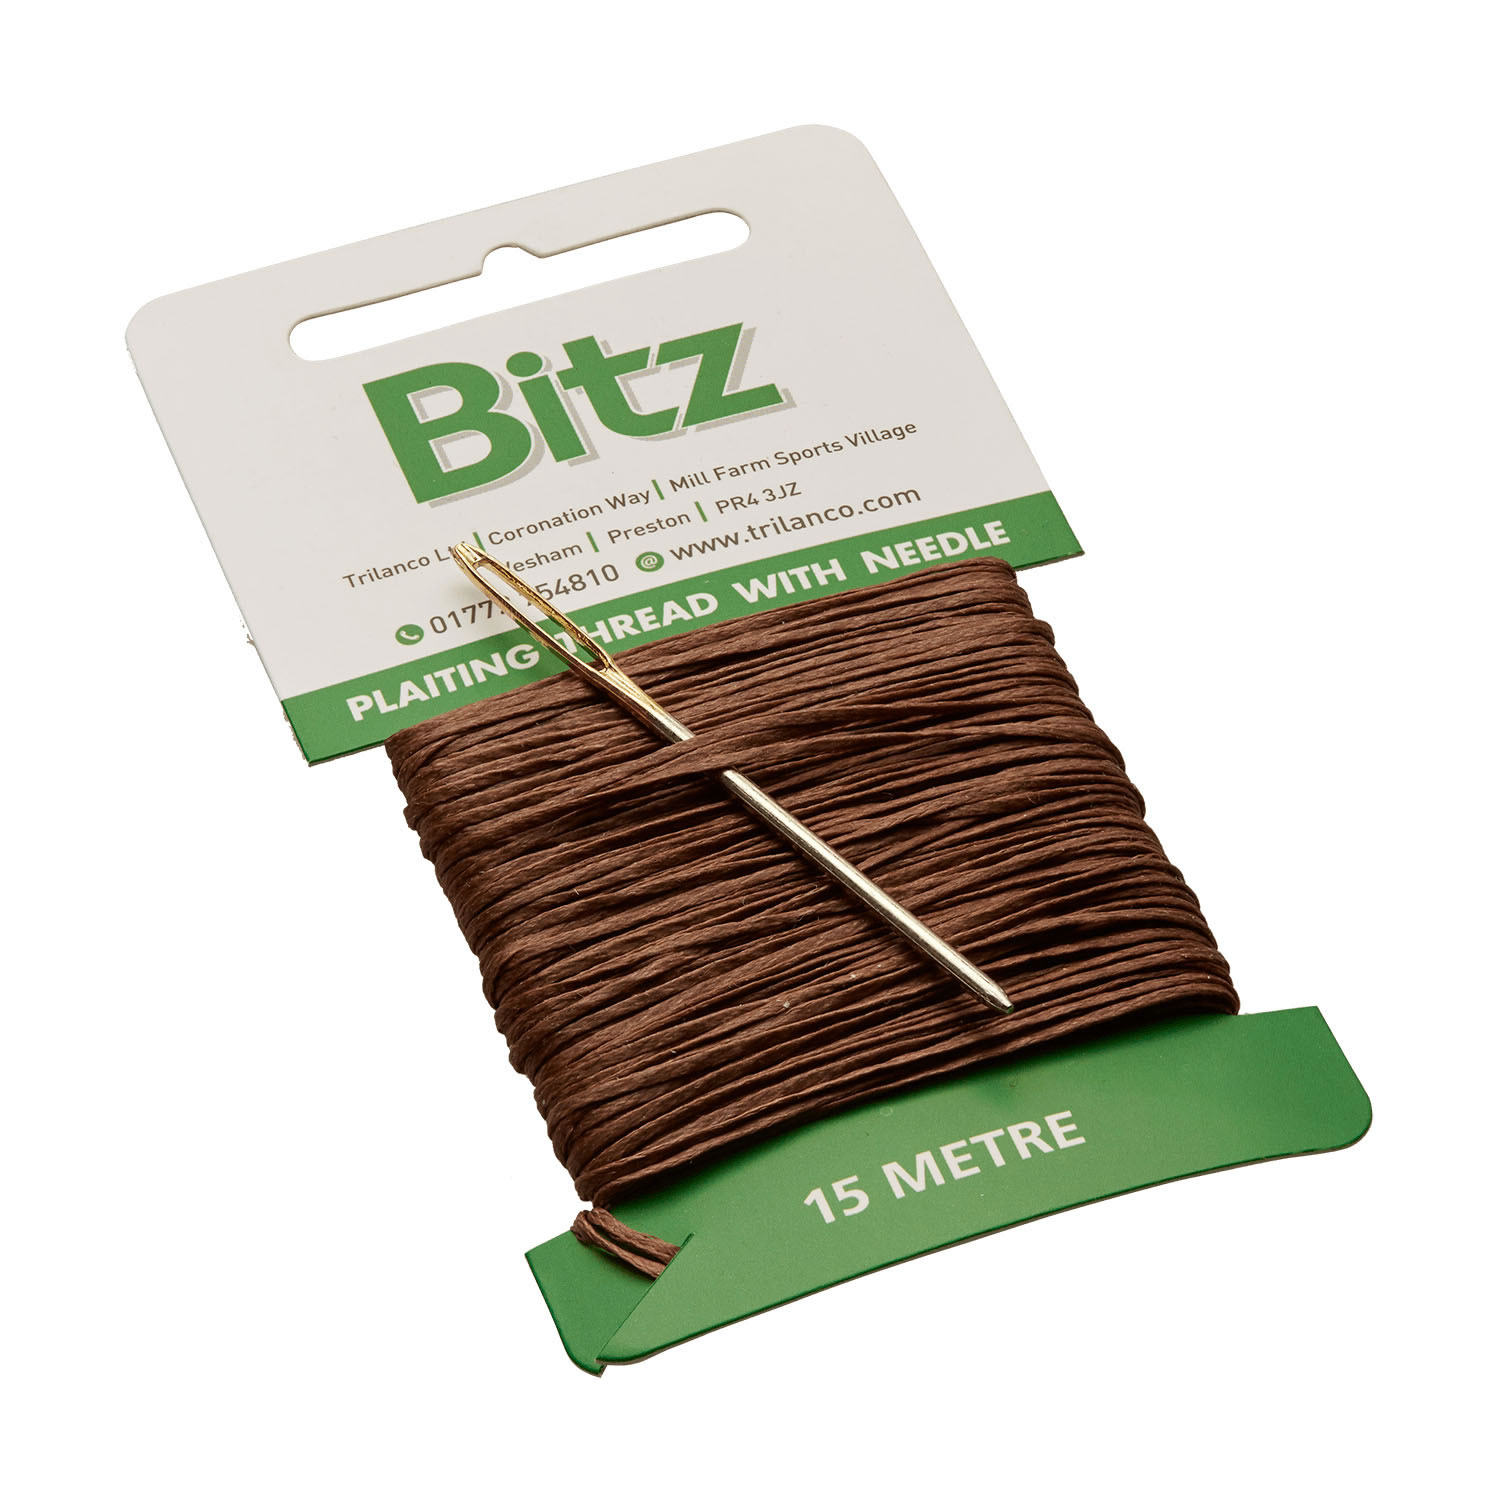 BITZ PLAITING CARD WITH NEEDLE BROWN 15M